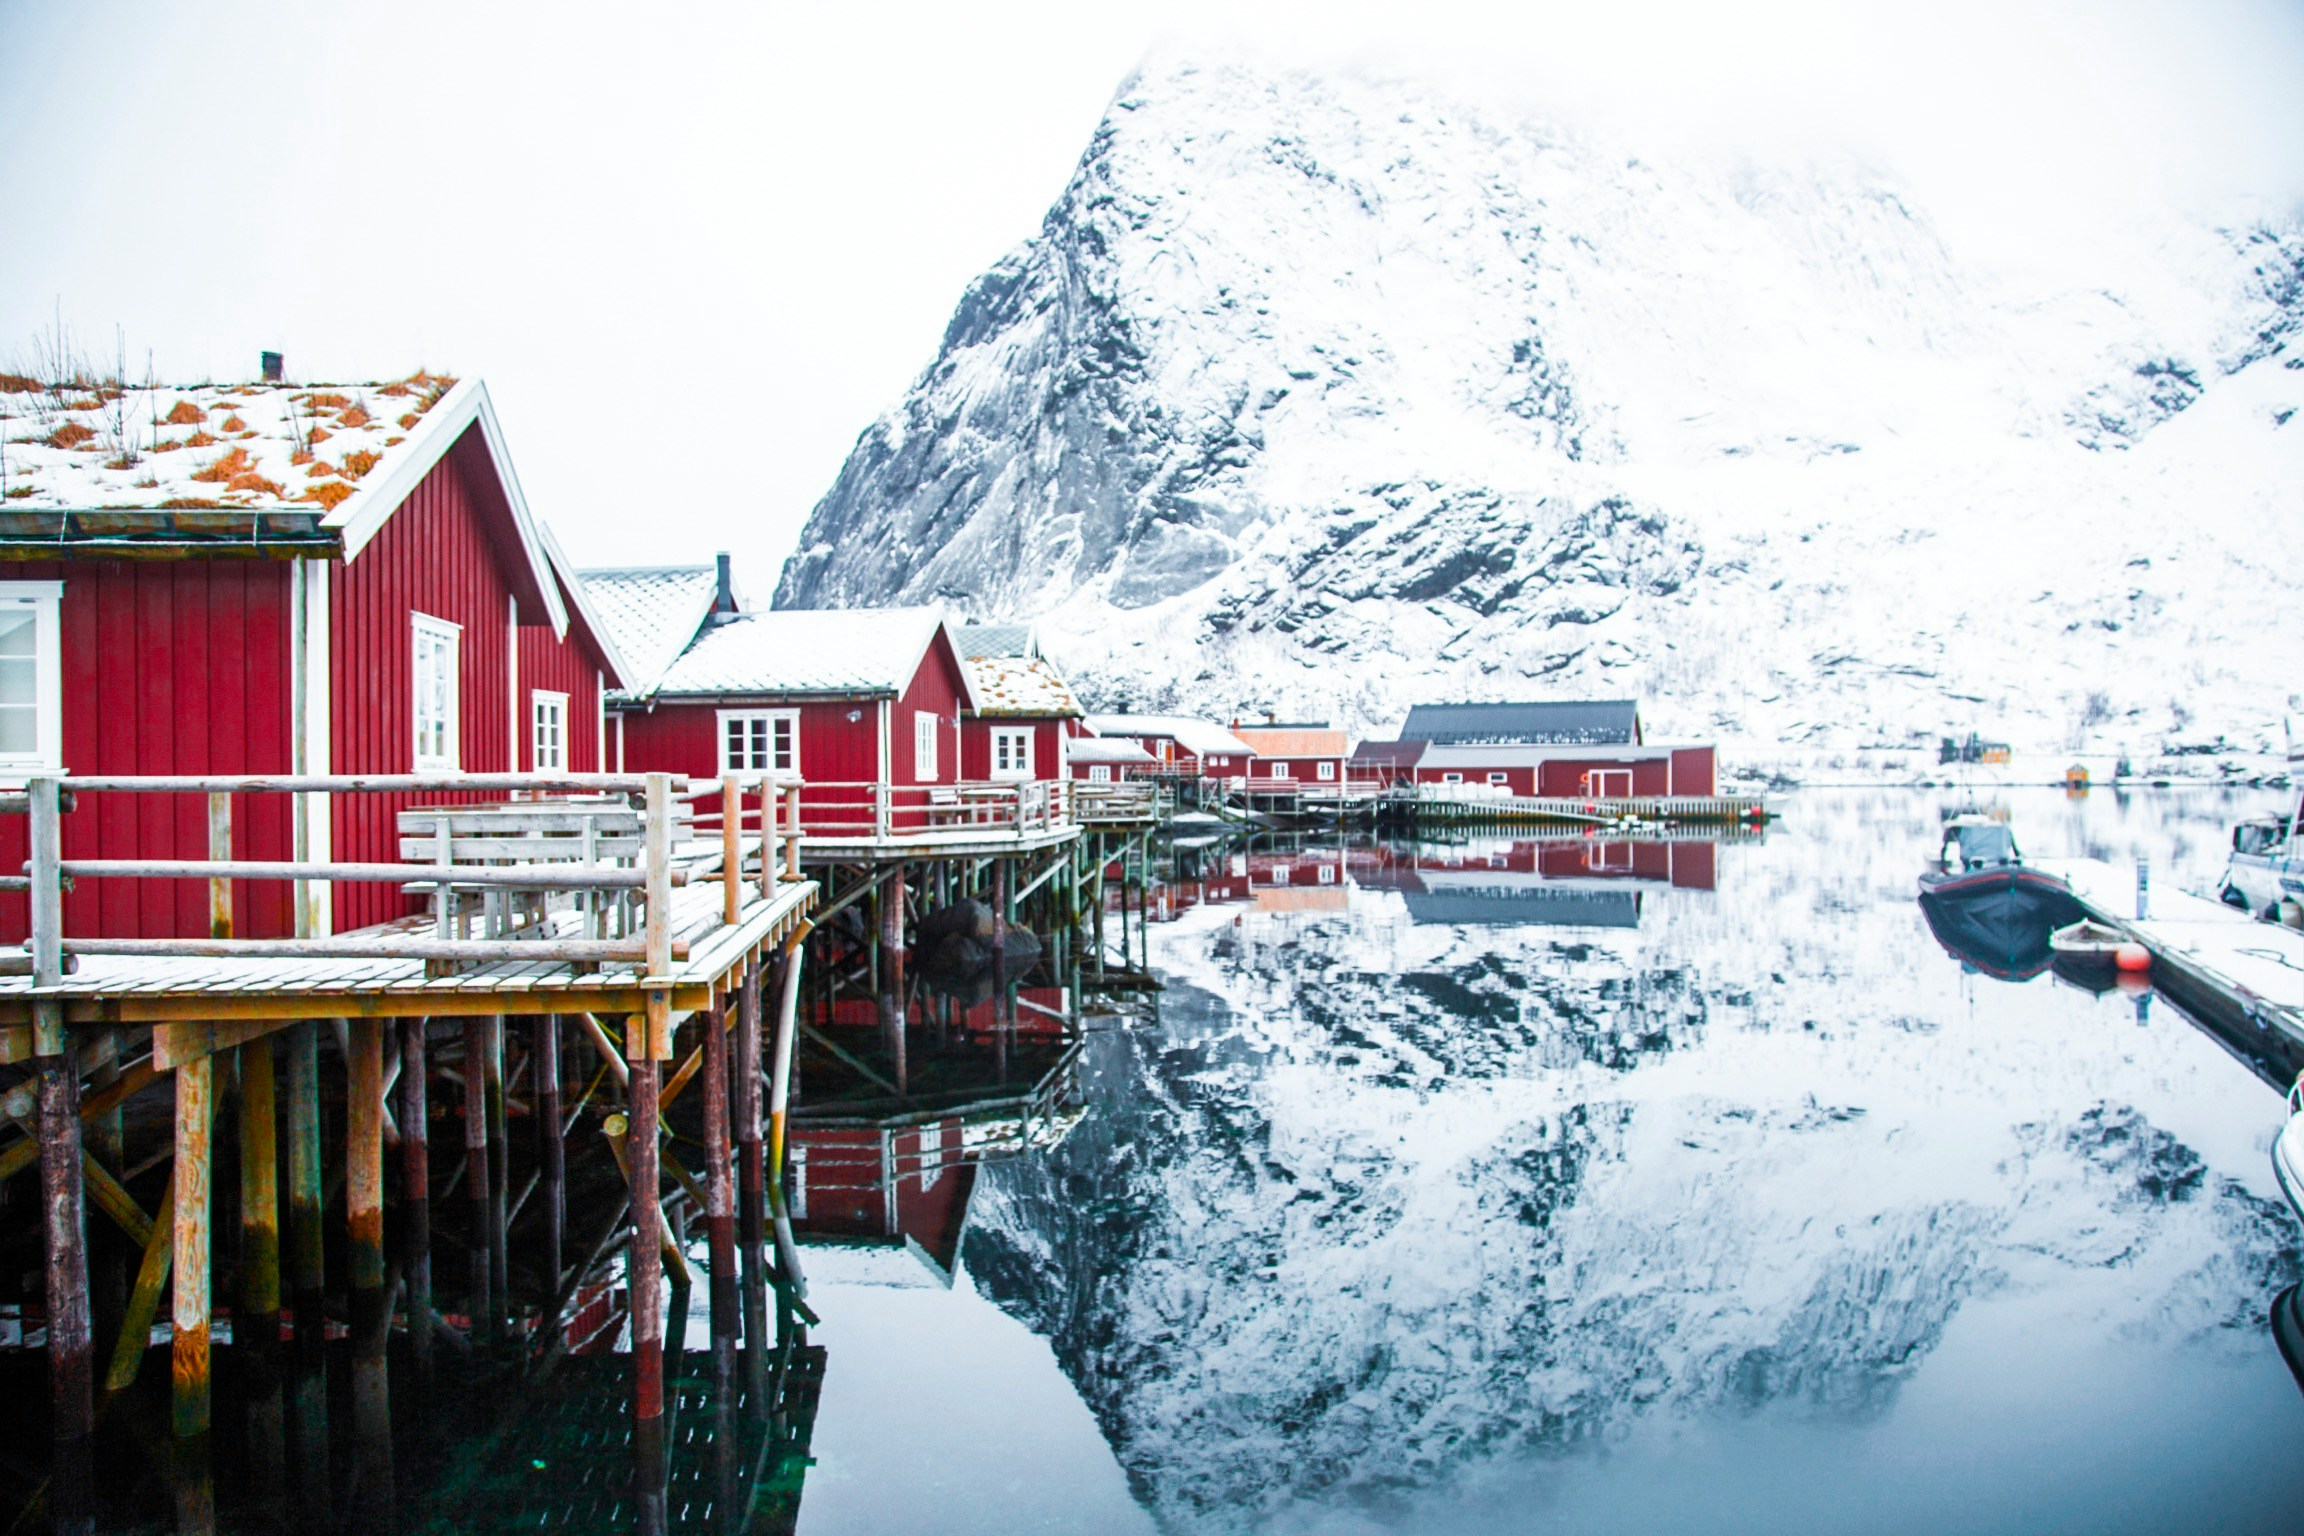 explore the breathtaking beauty of fjords with our travel guide. discover scenic views, serene waters, and adventure opportunities in fjords around the world.